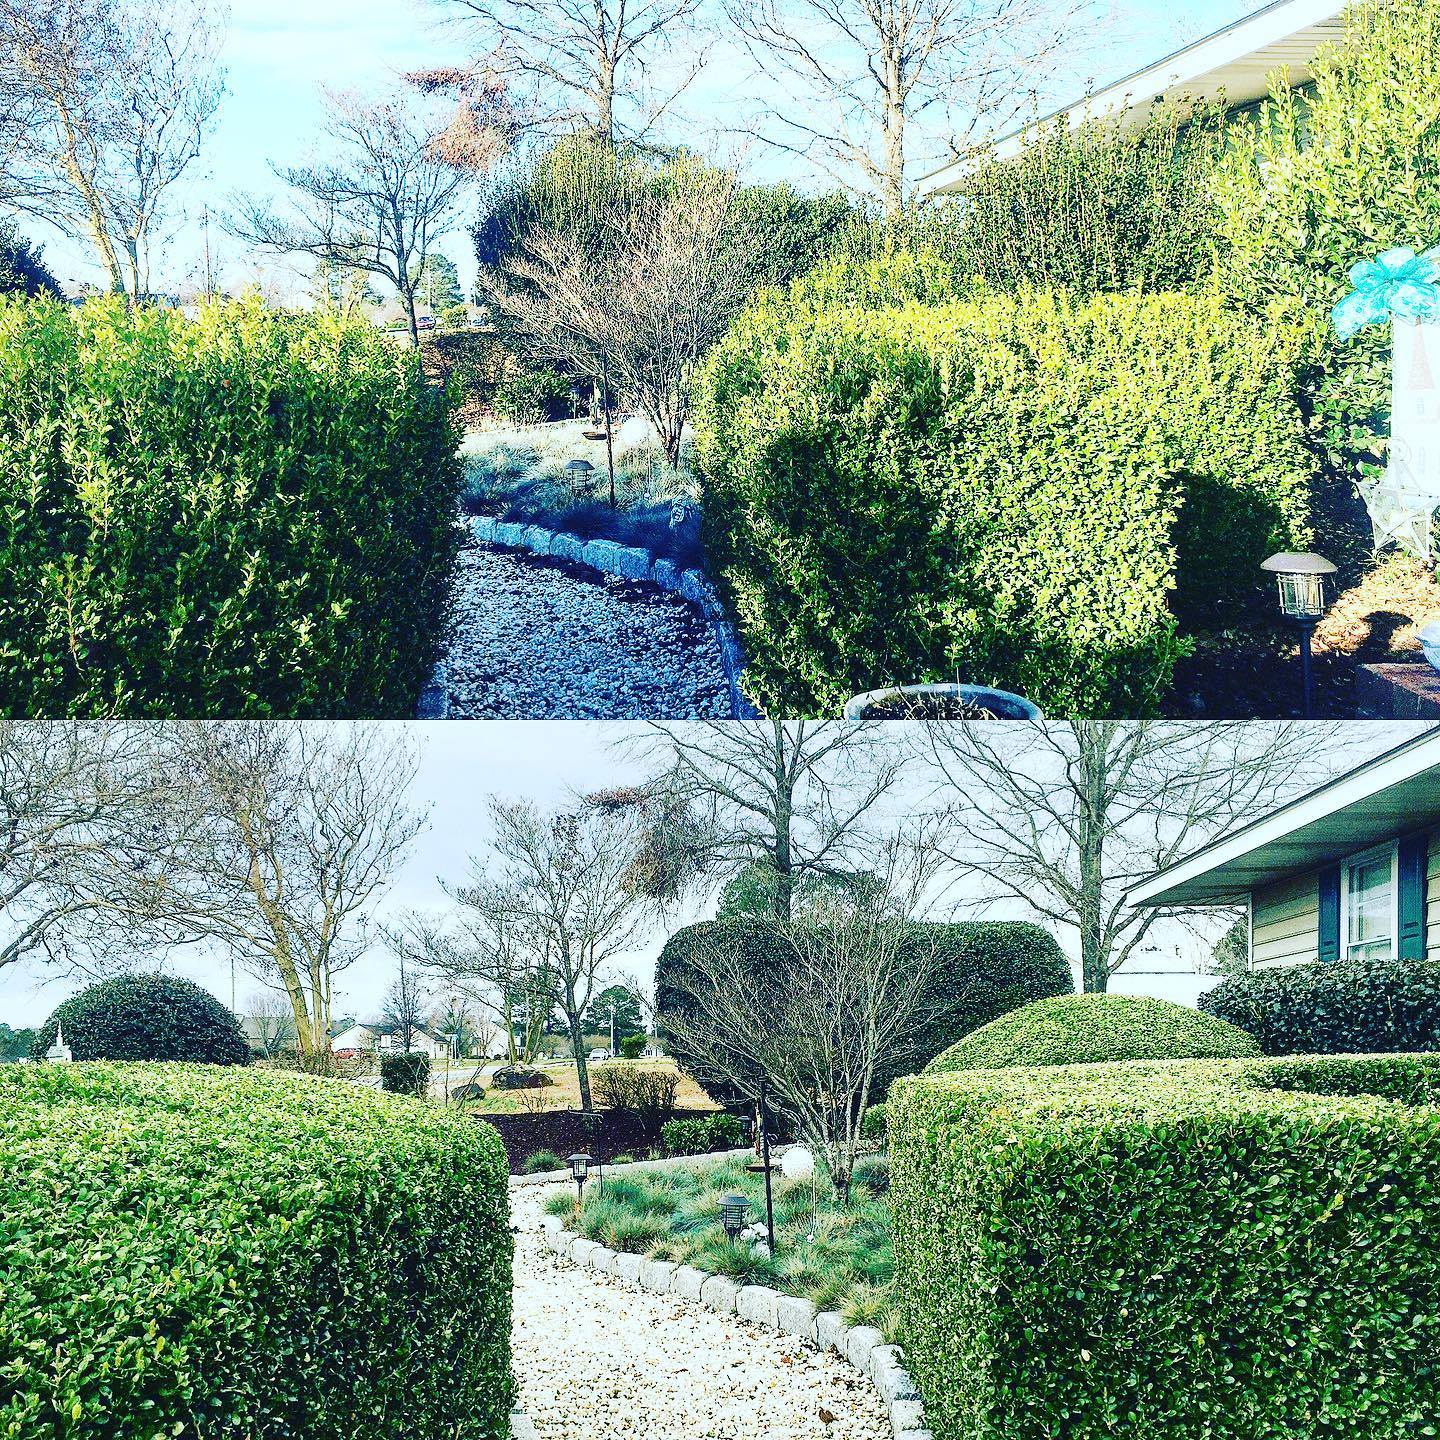 Hedge trimming service in Clayton NC